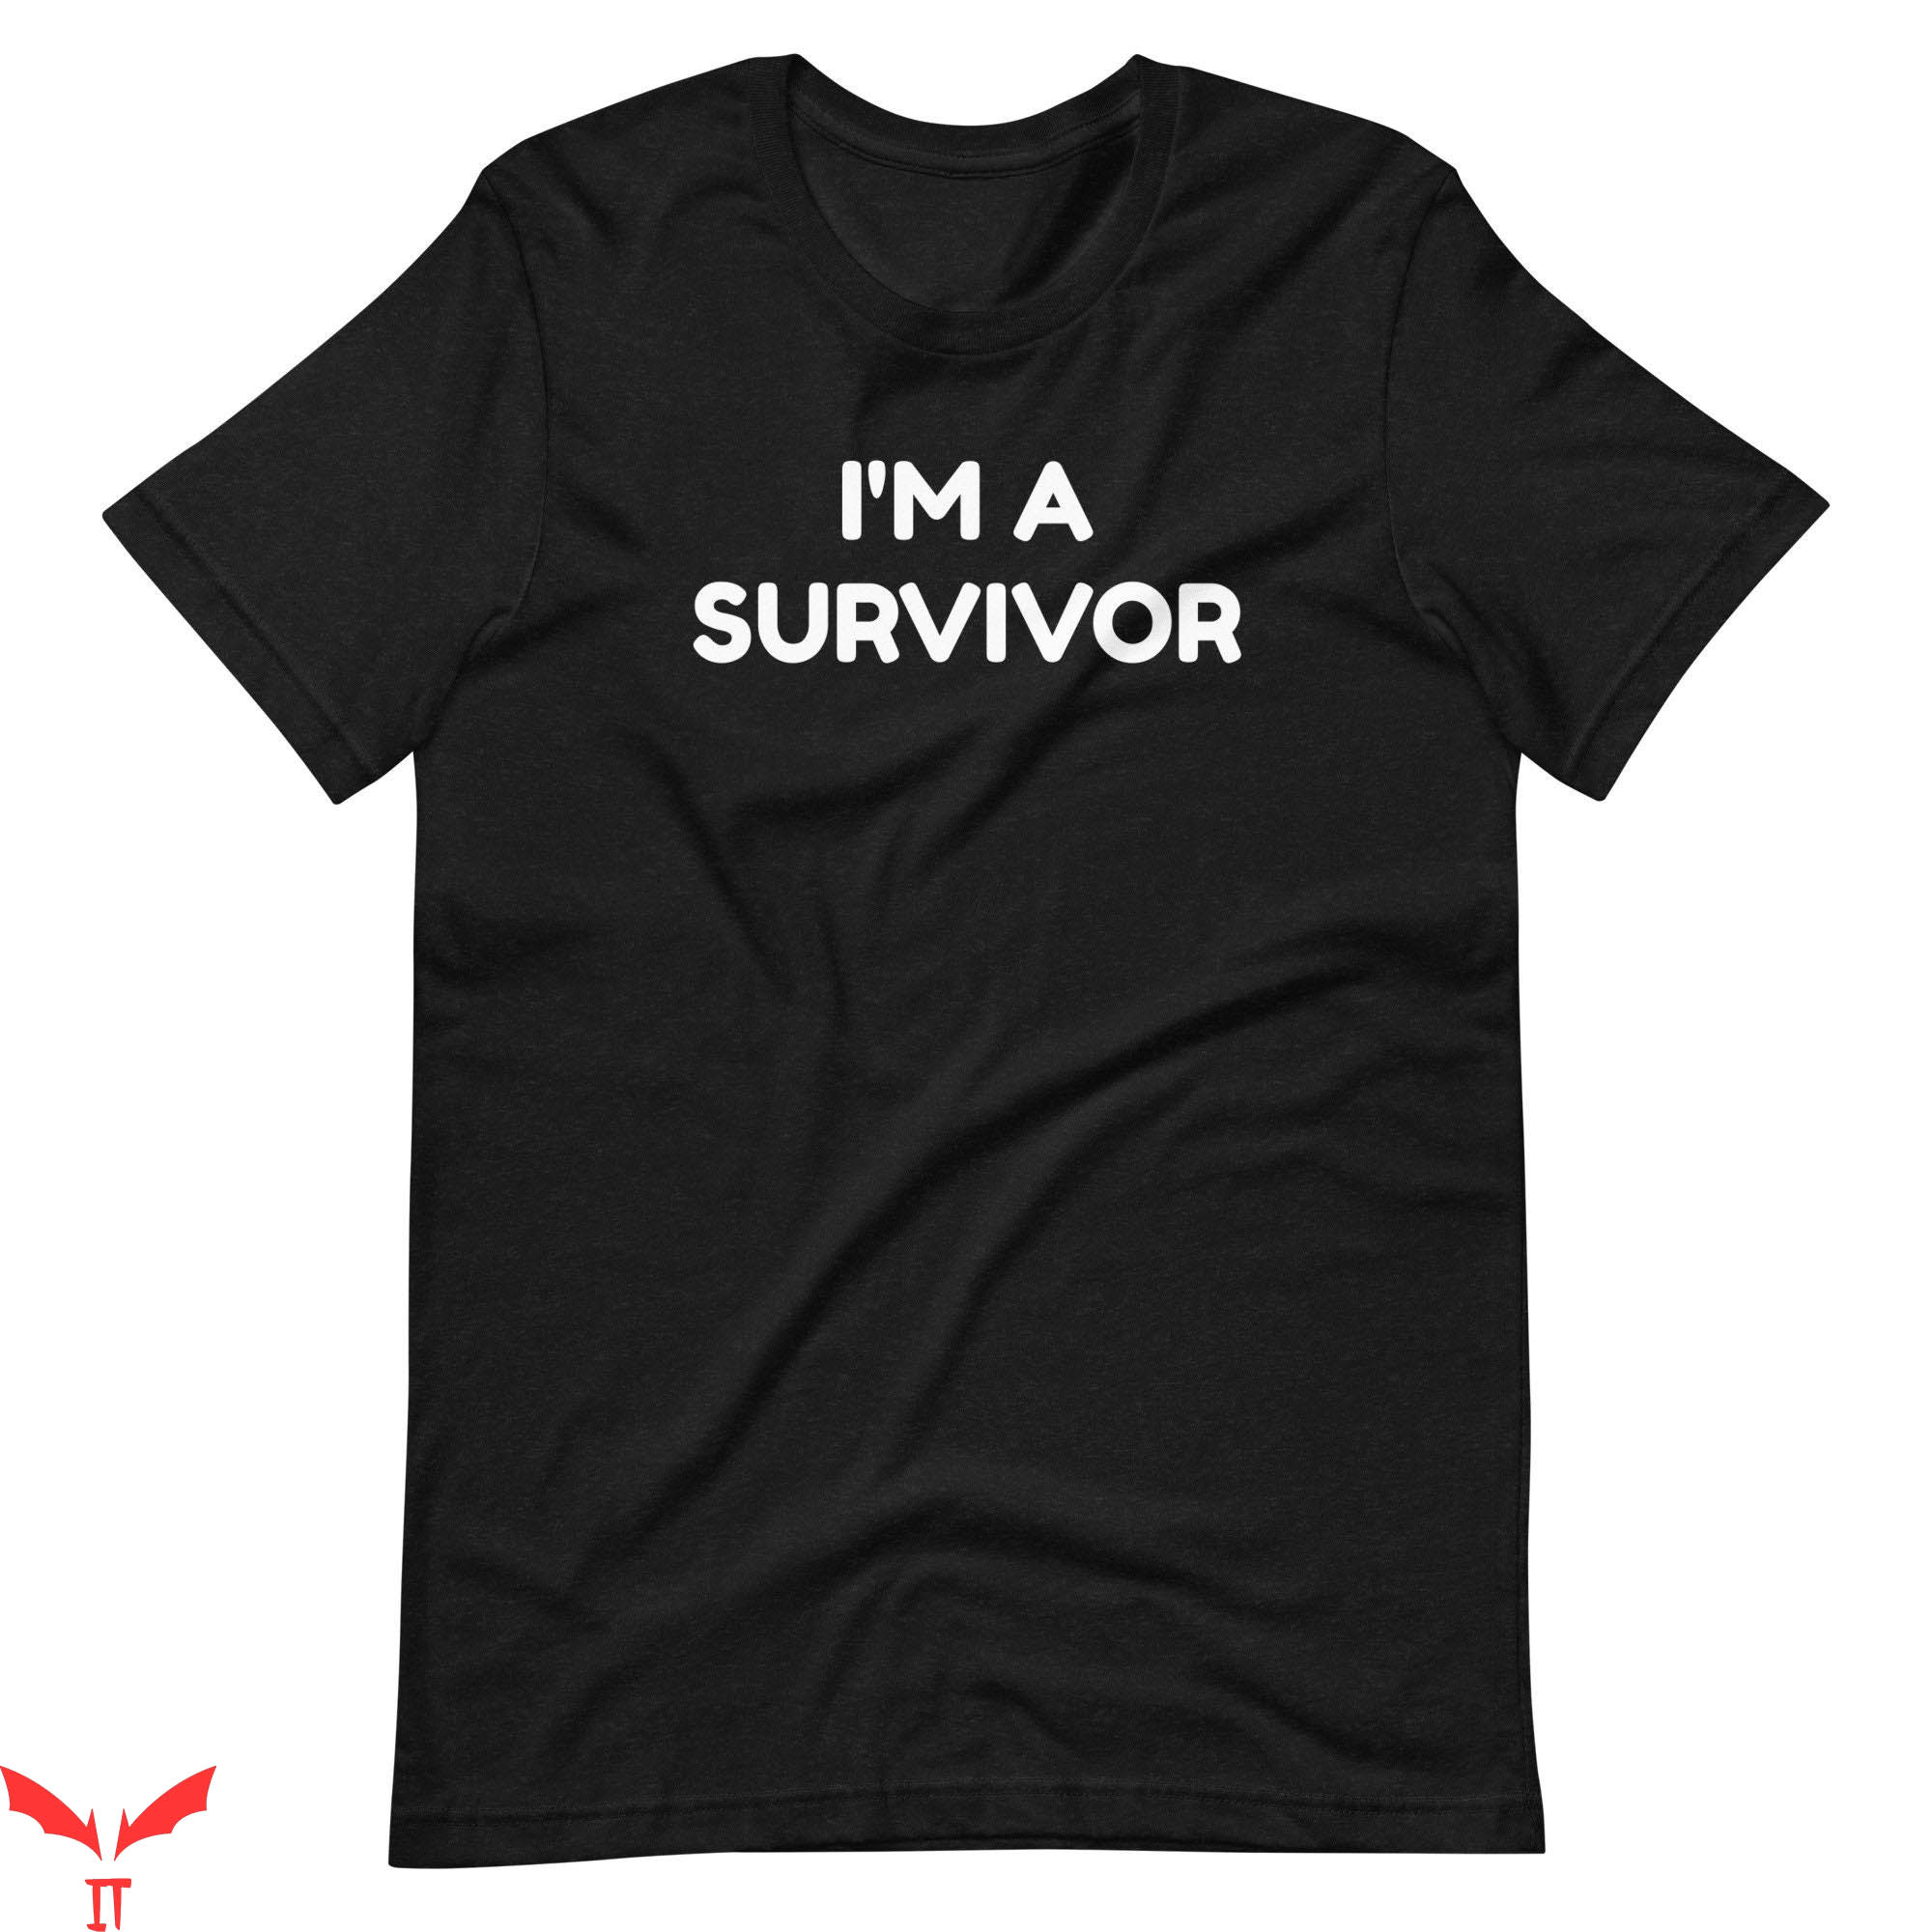 Survivor T-Shirt Funny Quote Cool Trendy Tee Shirt